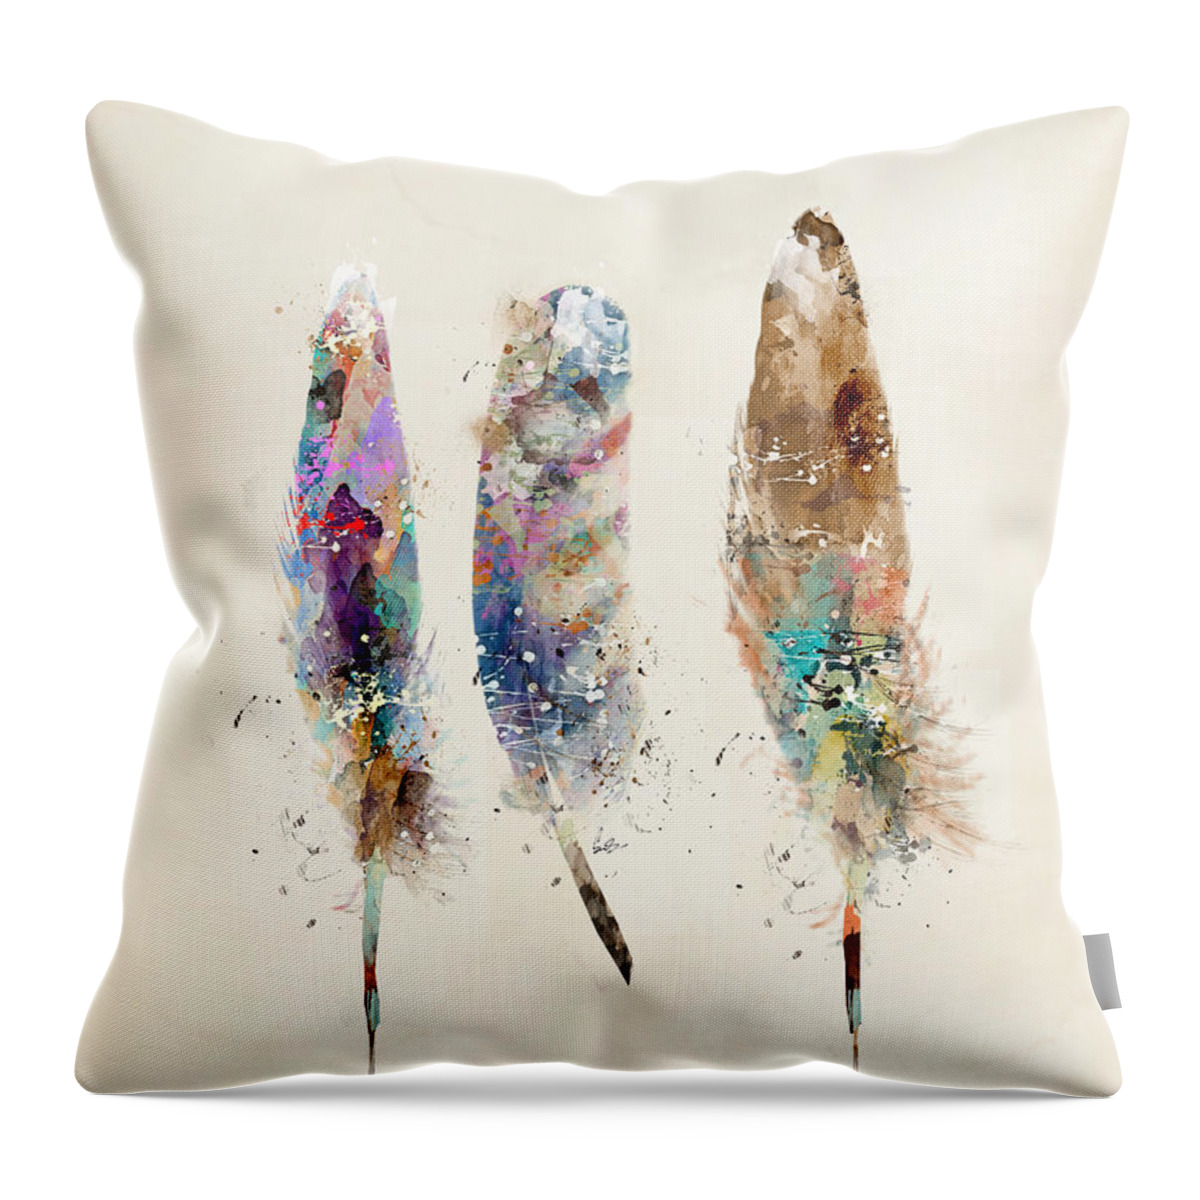 Feathers Throw Pillow featuring the painting Feathers by Bri Buckley